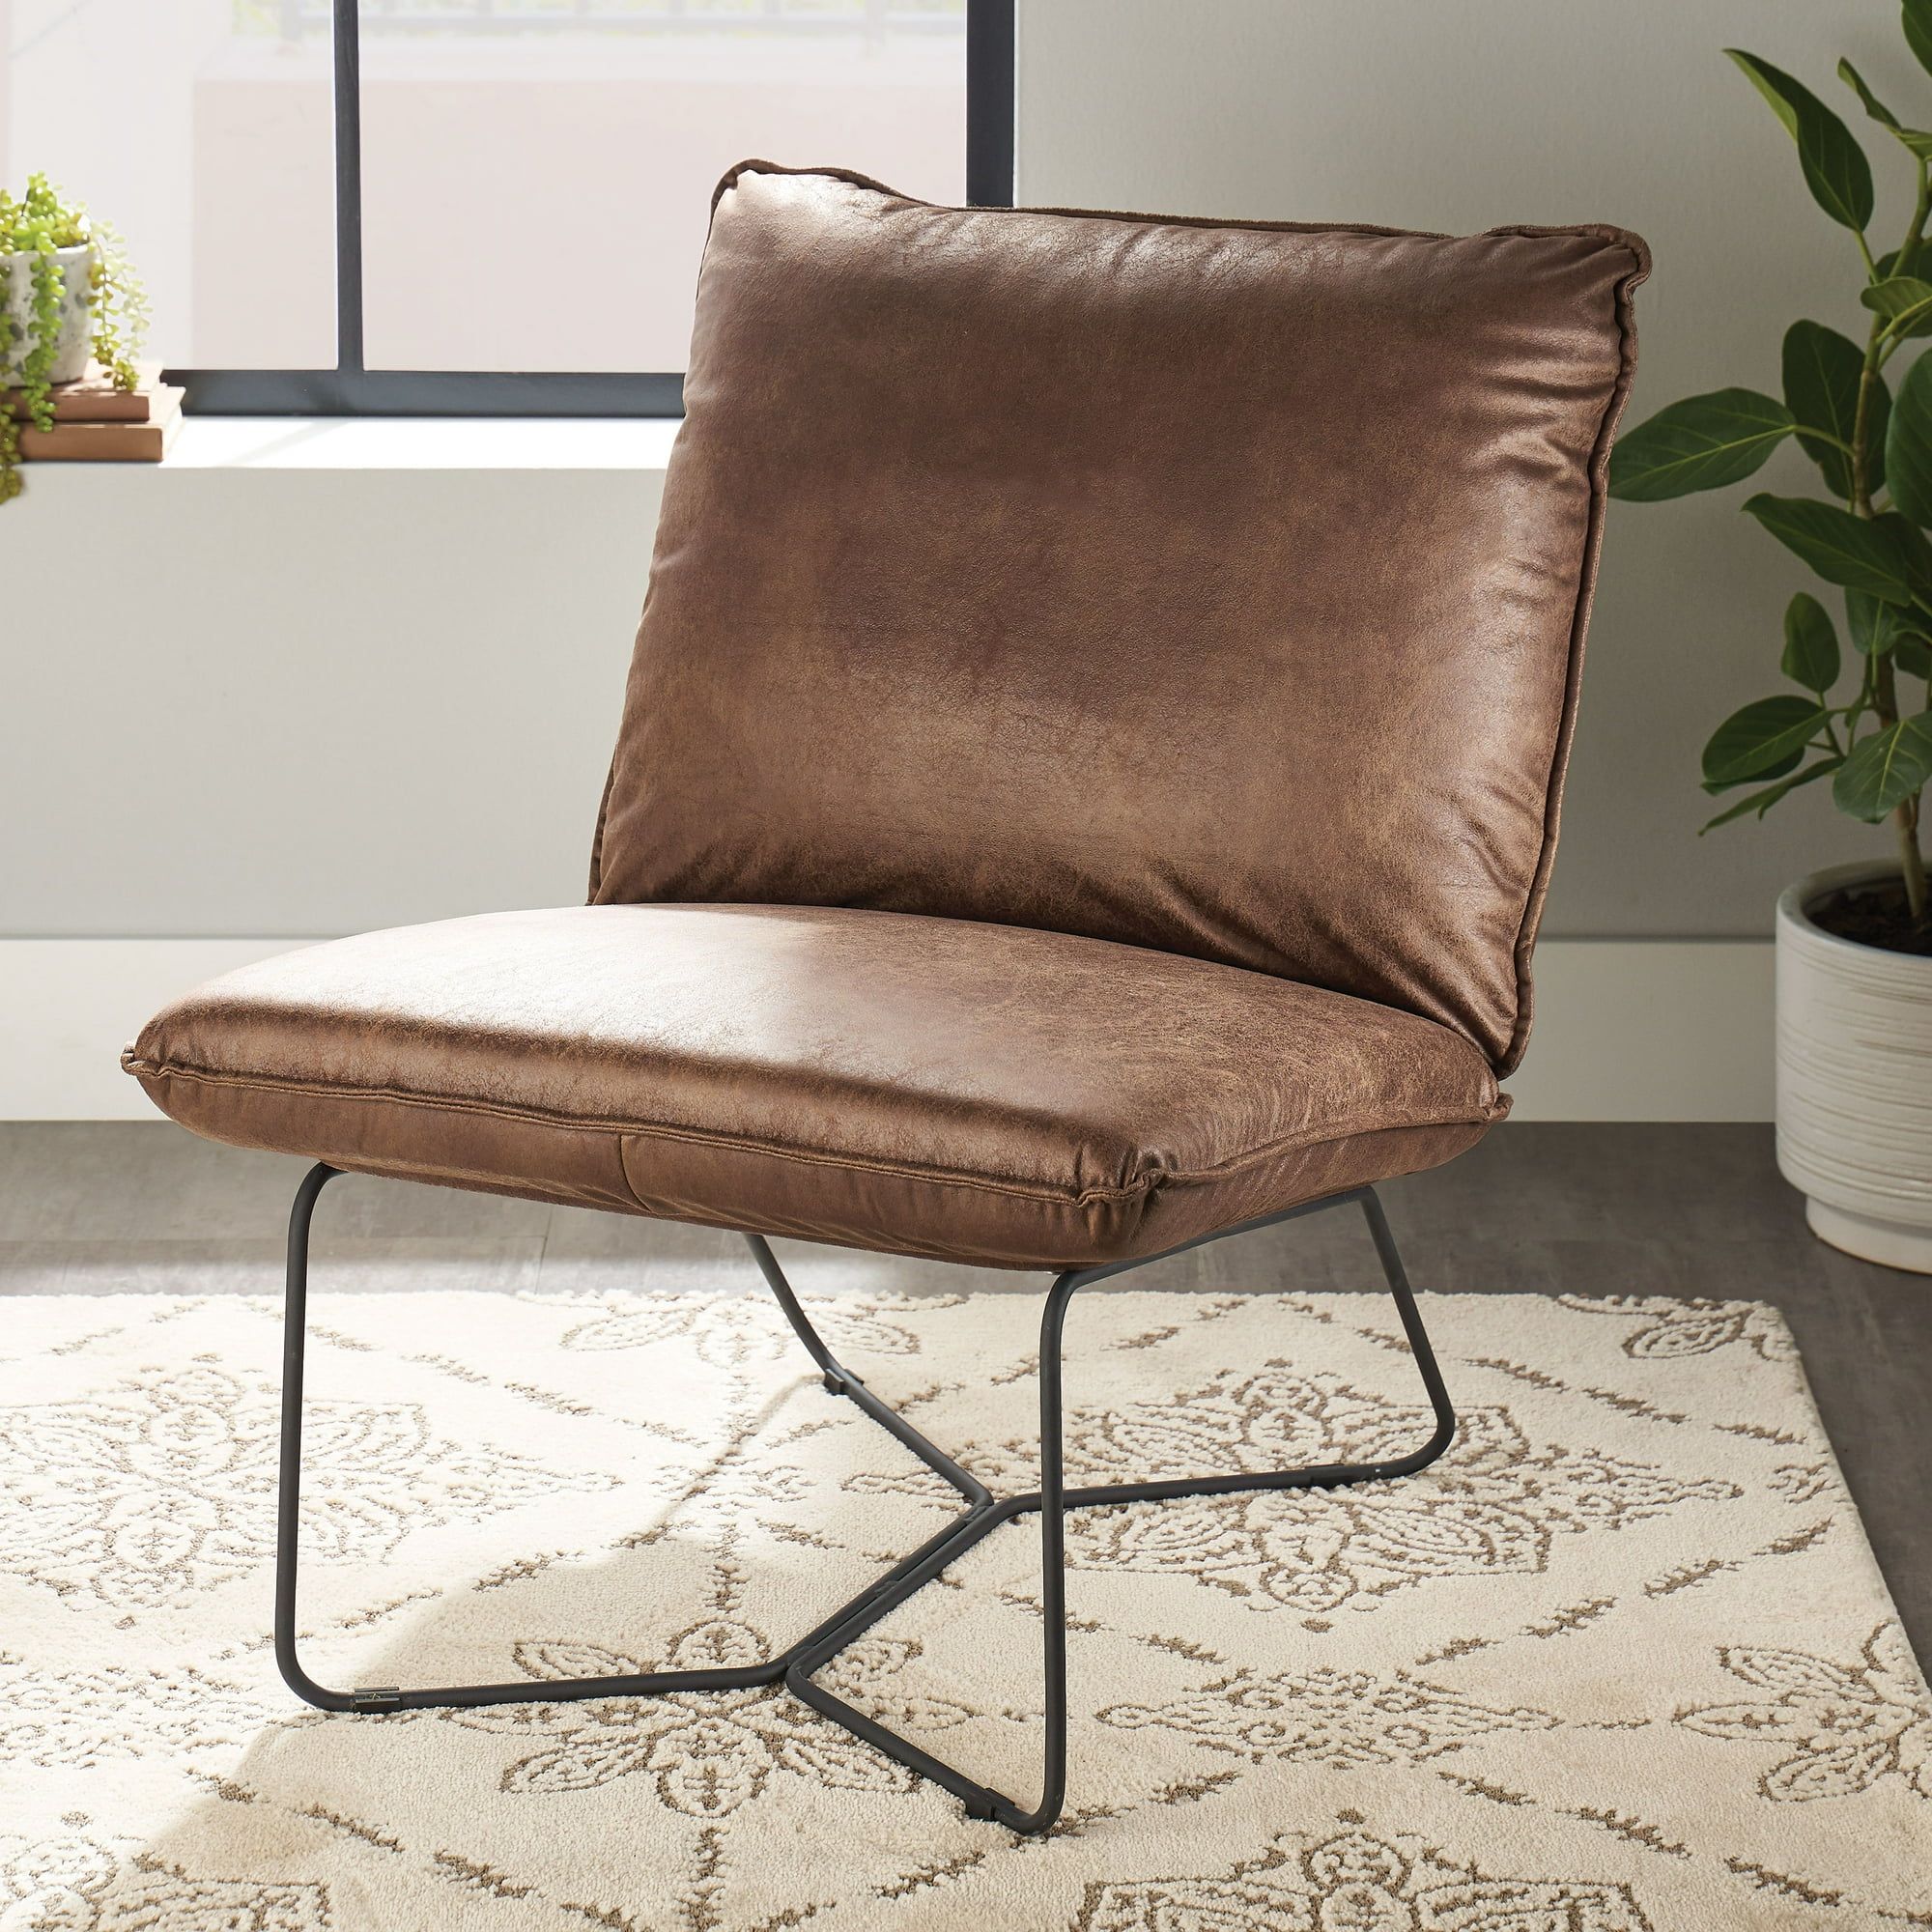 Better Homes & Gardens Pillow Lounge Chair, Brown Faux Leather Upholstery | Walmart (US)